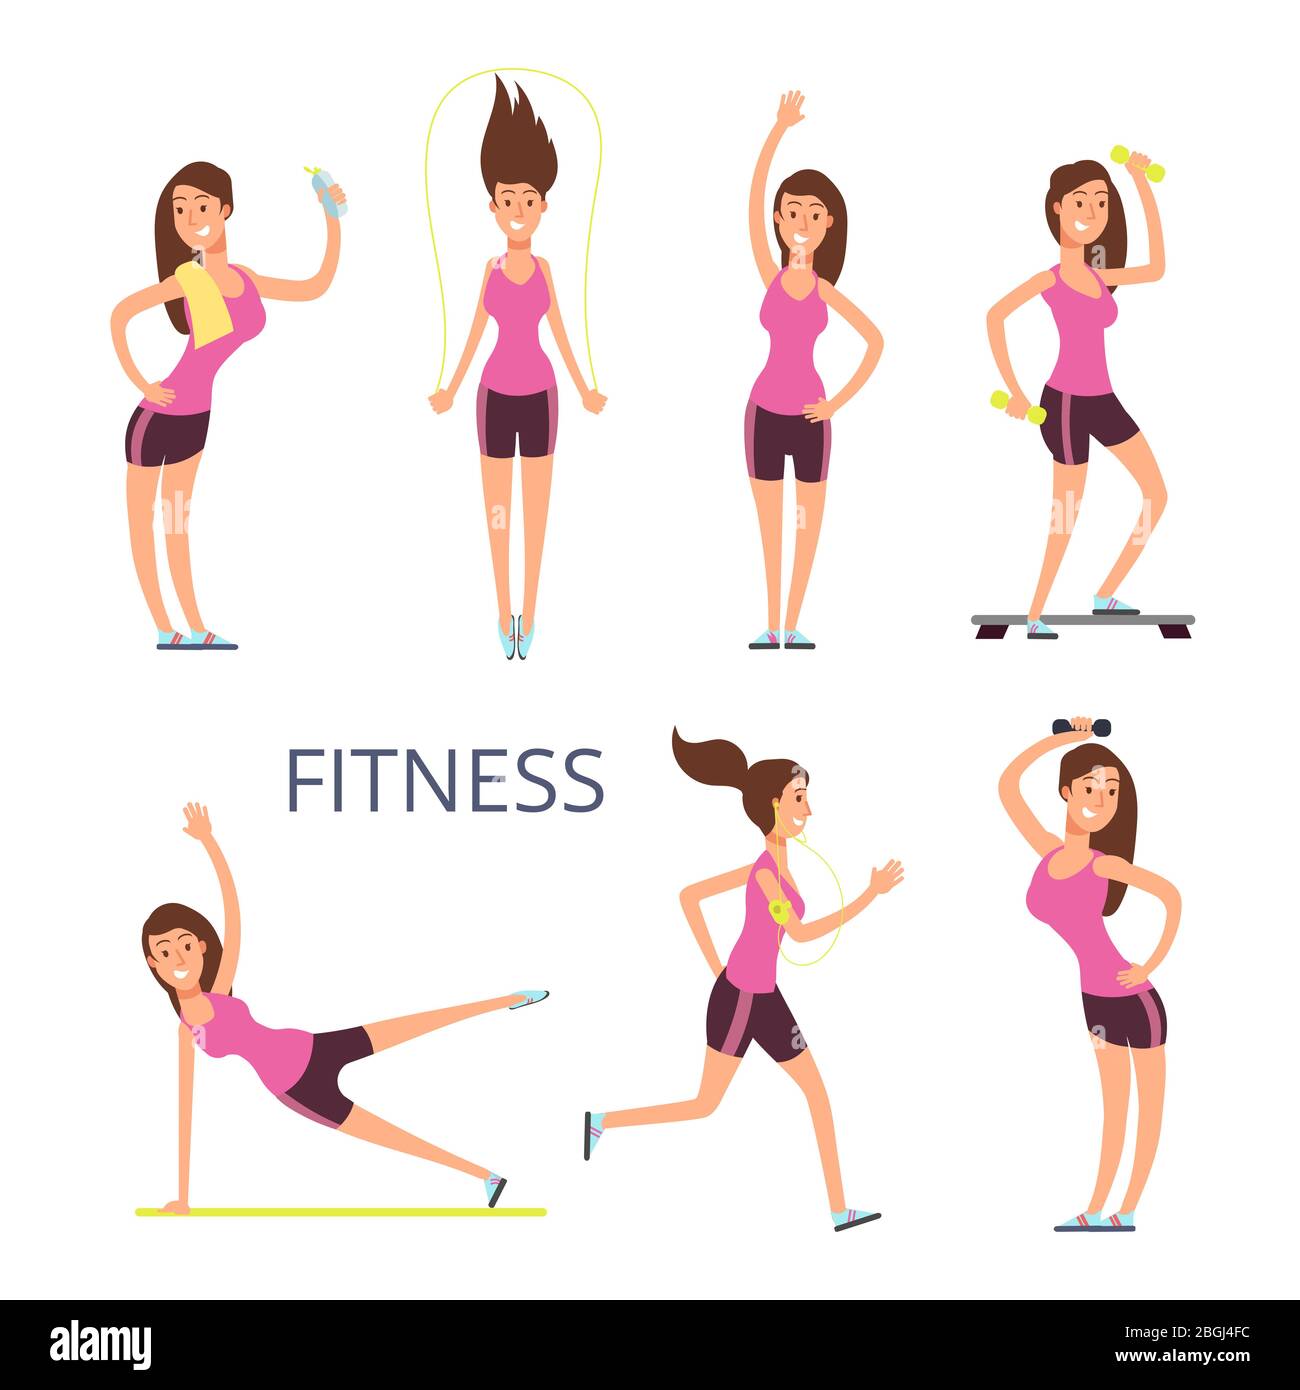 Cartoon sport young woman characters, fitness girl isolated on white background. Sport female healthy, character cartoon with sporty figure illustration Stock Vector